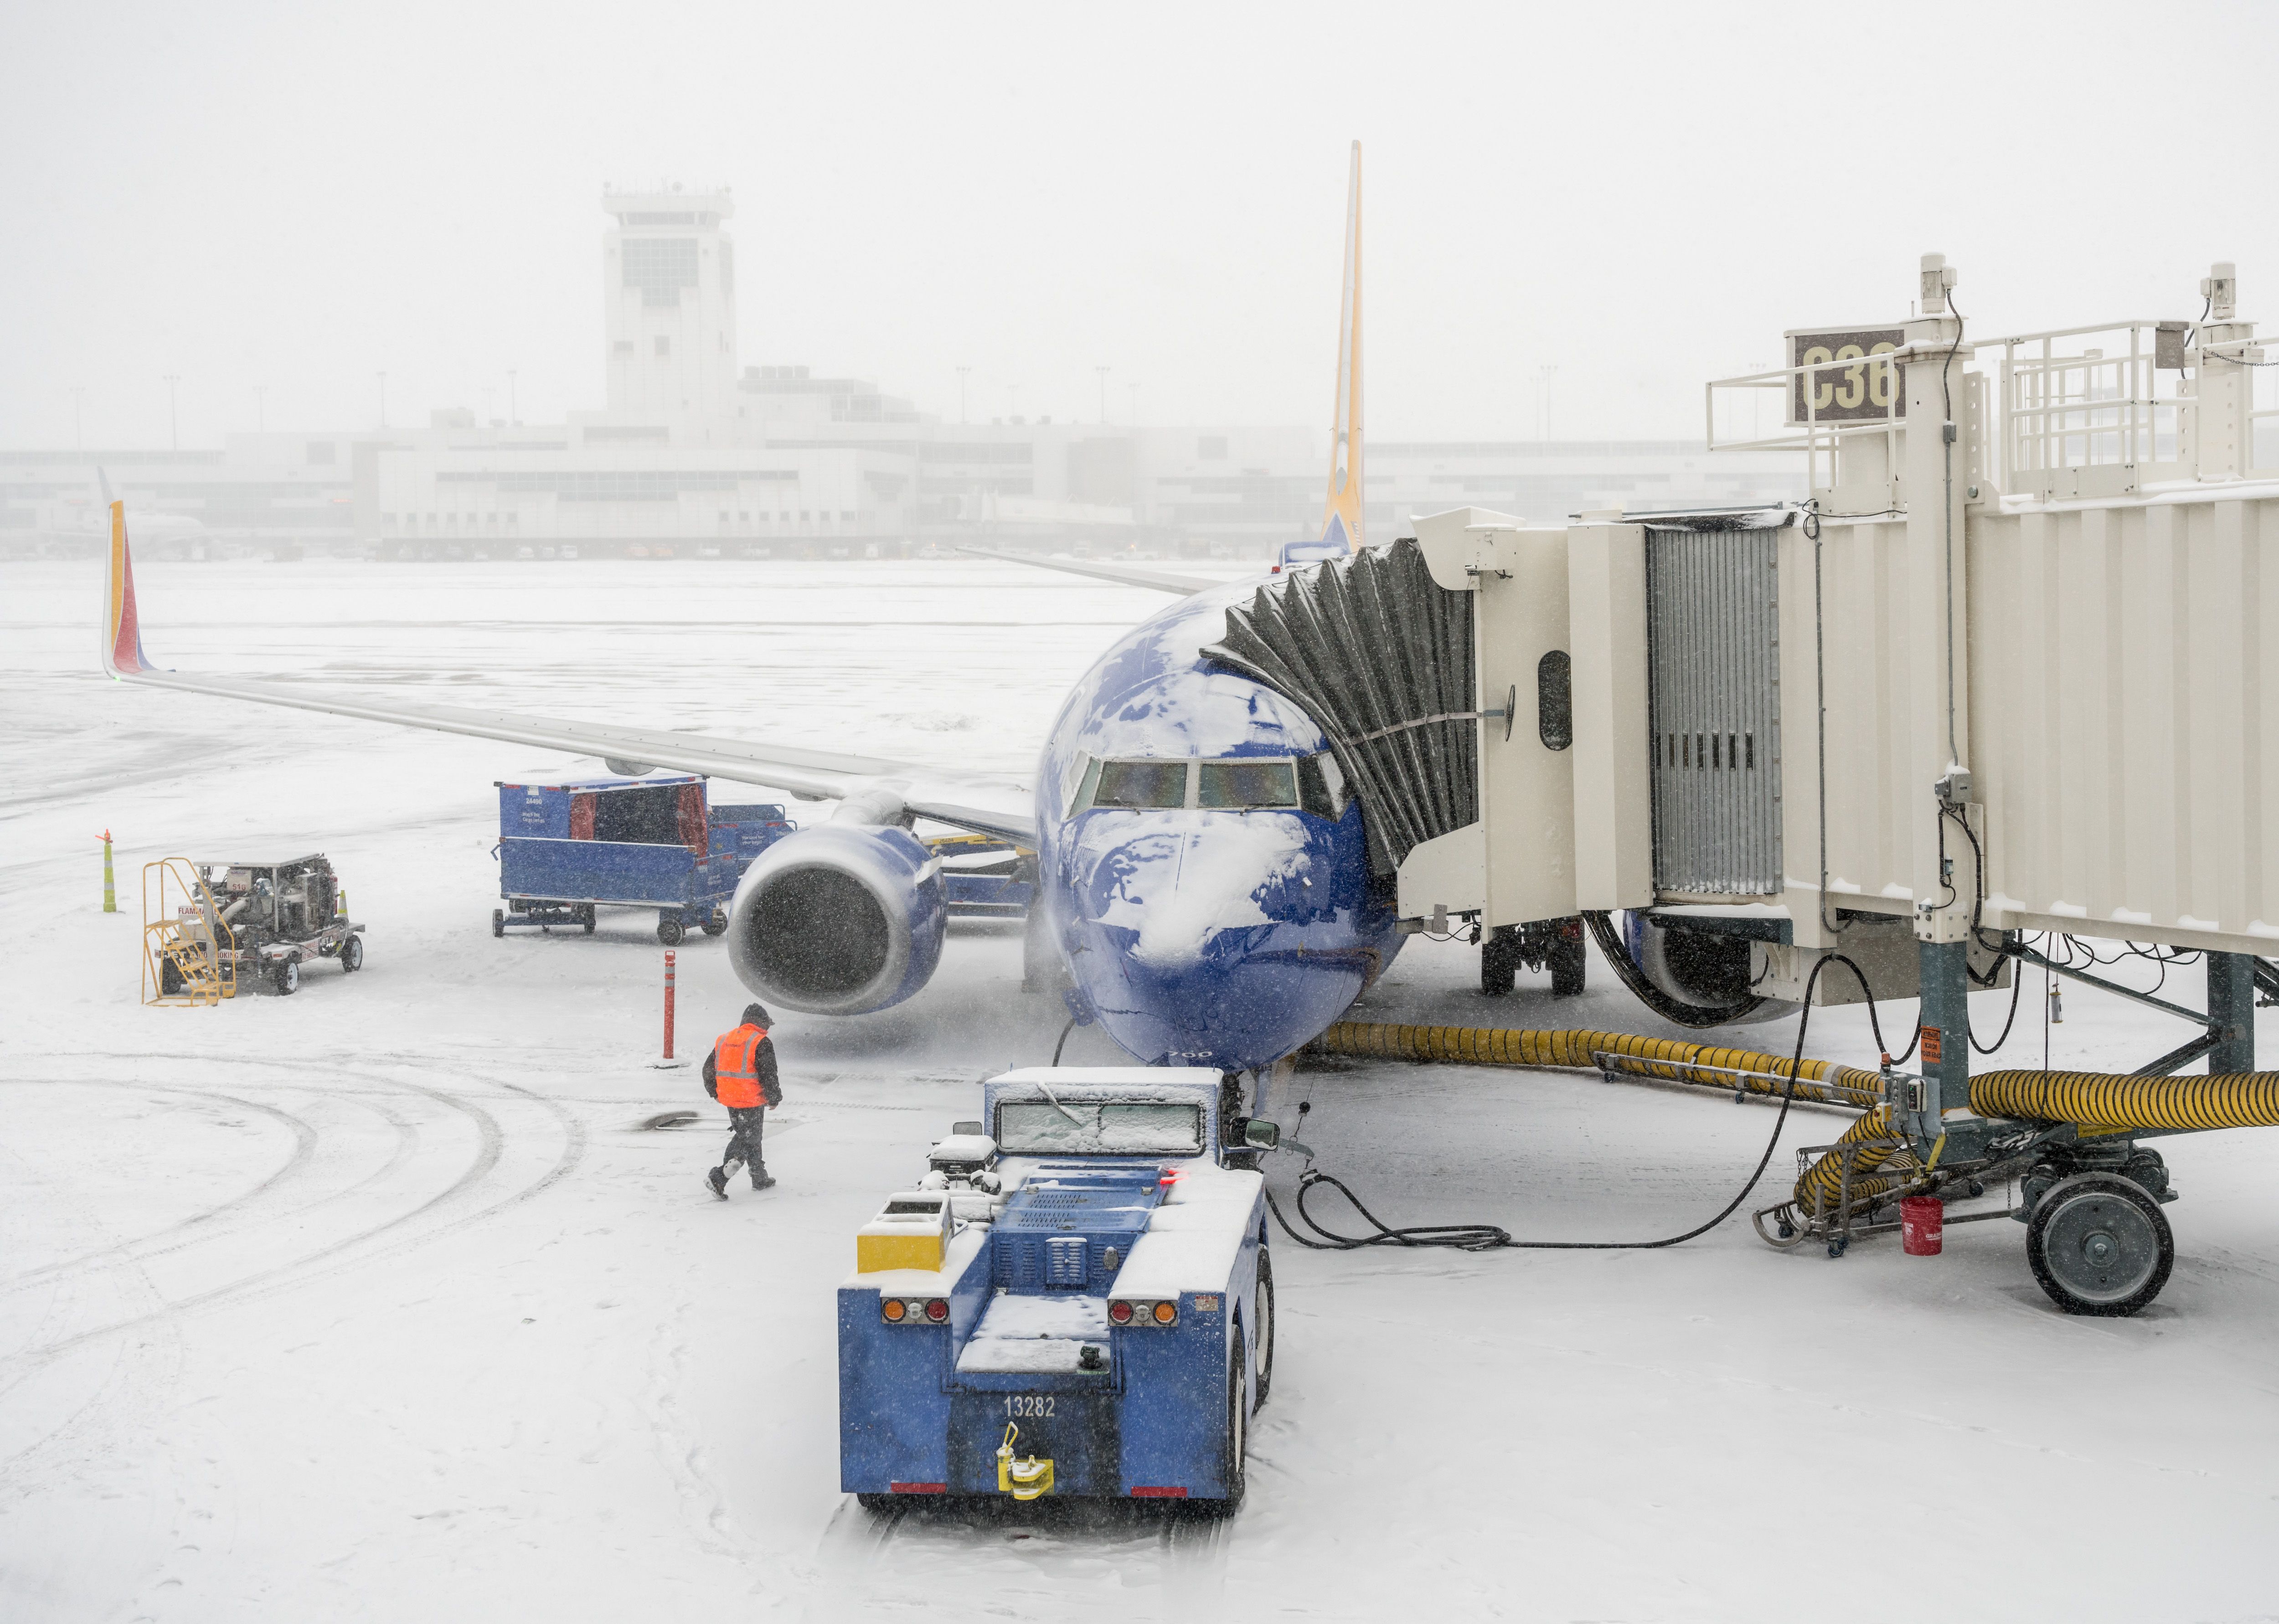 DENVER, COLORADO: JANUARY 24, 2019: Southwest planes being loaded at the jetway in snow storm